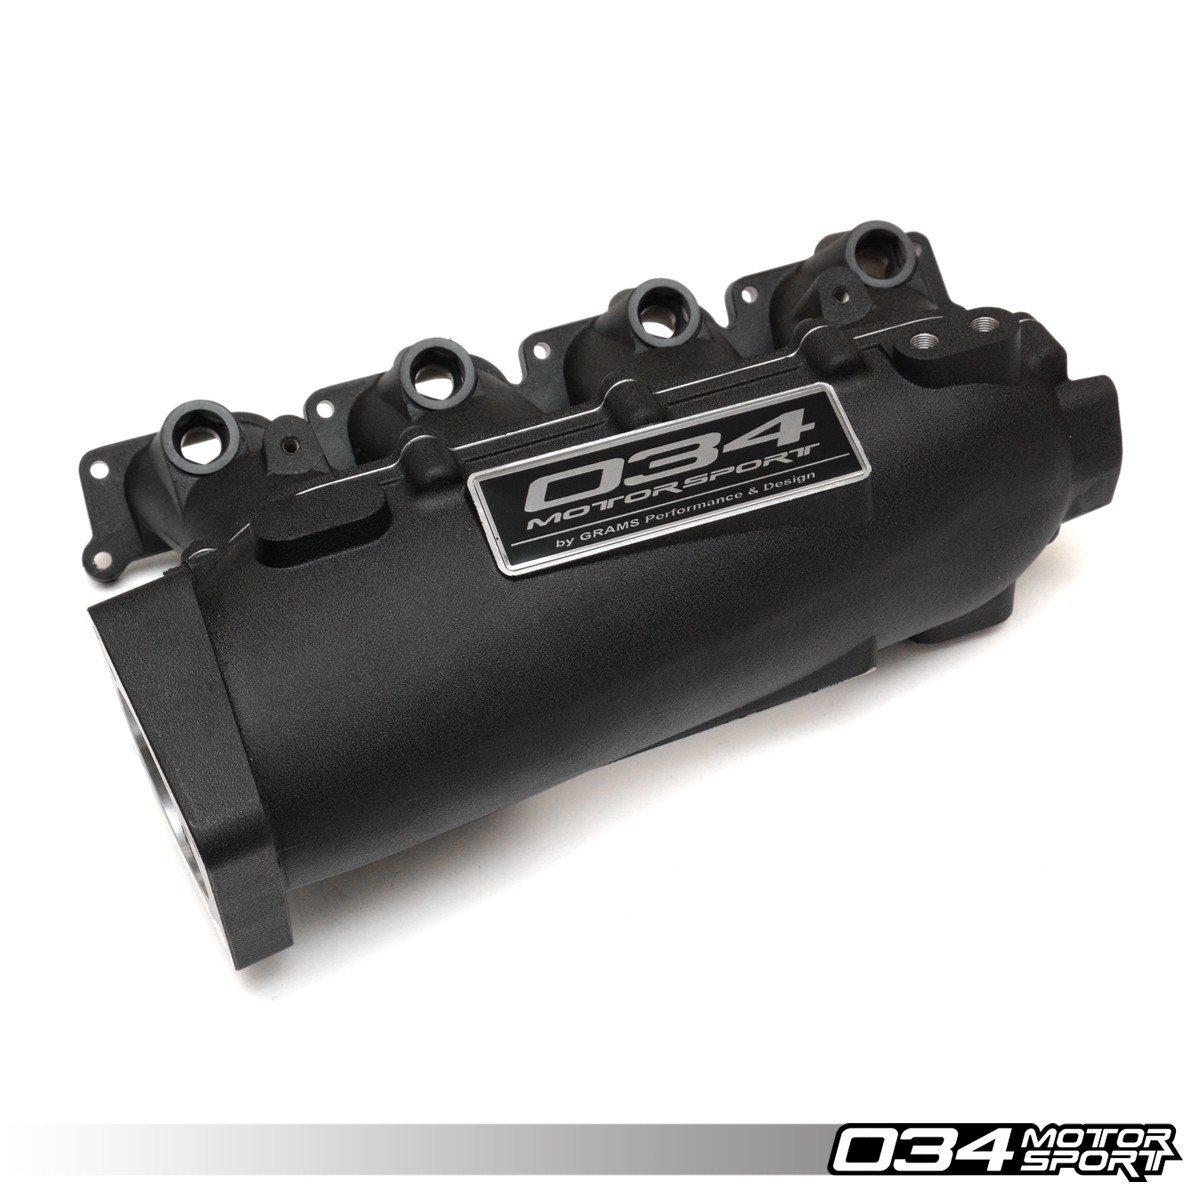 034Motorsport High Flow Intake Manifold, Transverse 1.8T, Small Port-A Little Tuning Co